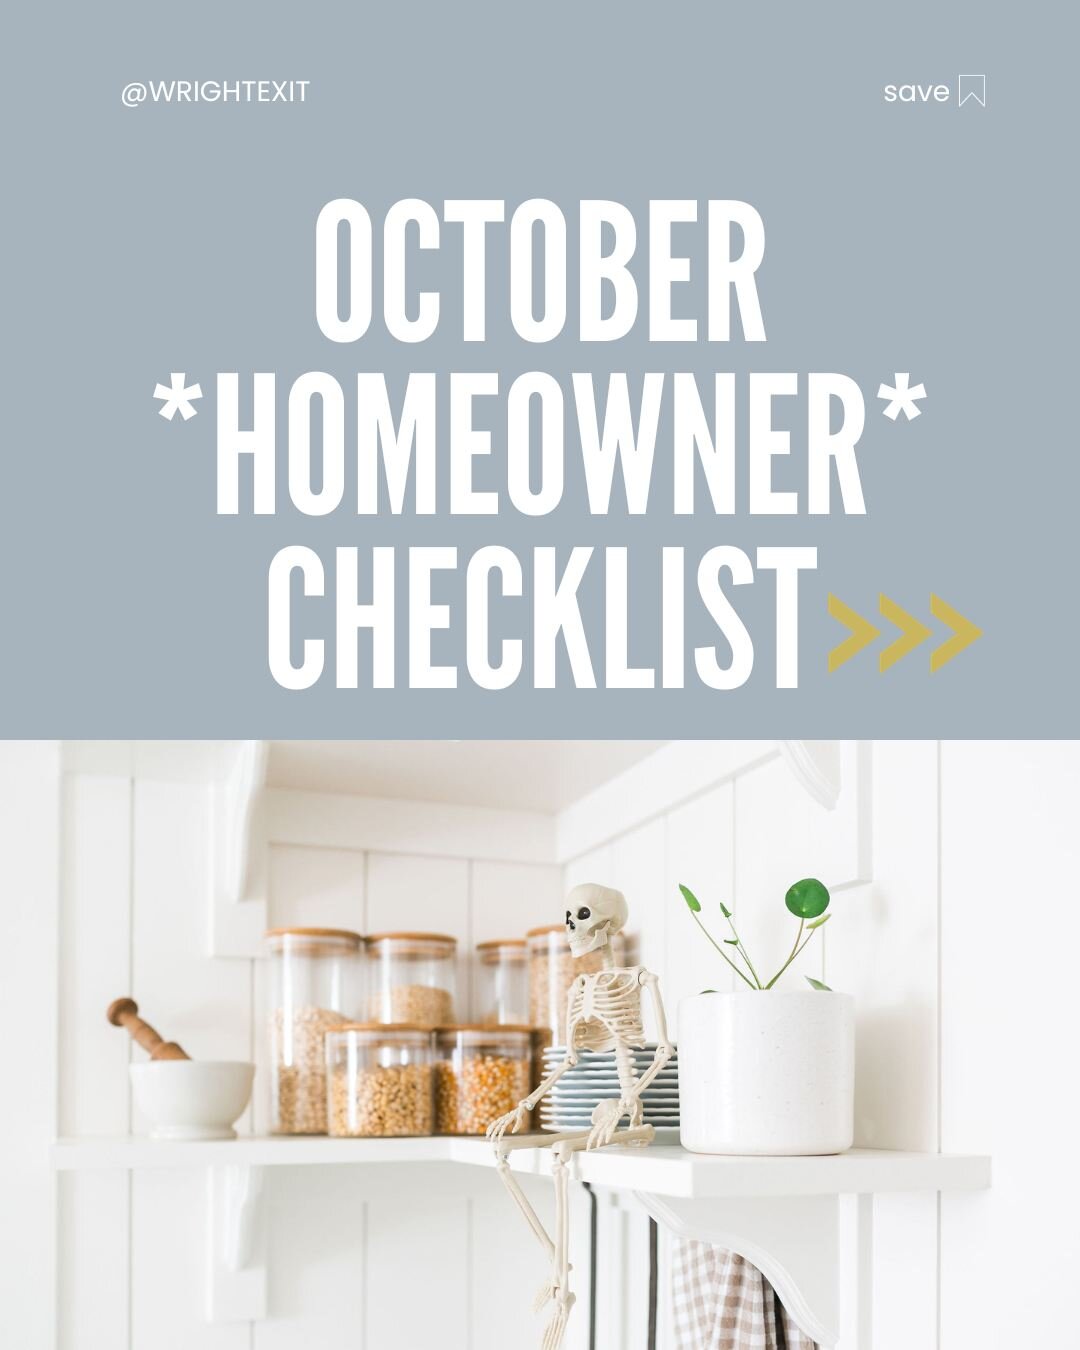 🧹 Hold onto your broomsticks, your OCTOBER Homeowner Checklist is HERE!

This month's checklist is designed to keep your home from getting spooky and covered in cobwebs! 🕸️

Don't miss the Fall infused fun things to check off too, like visiting a l